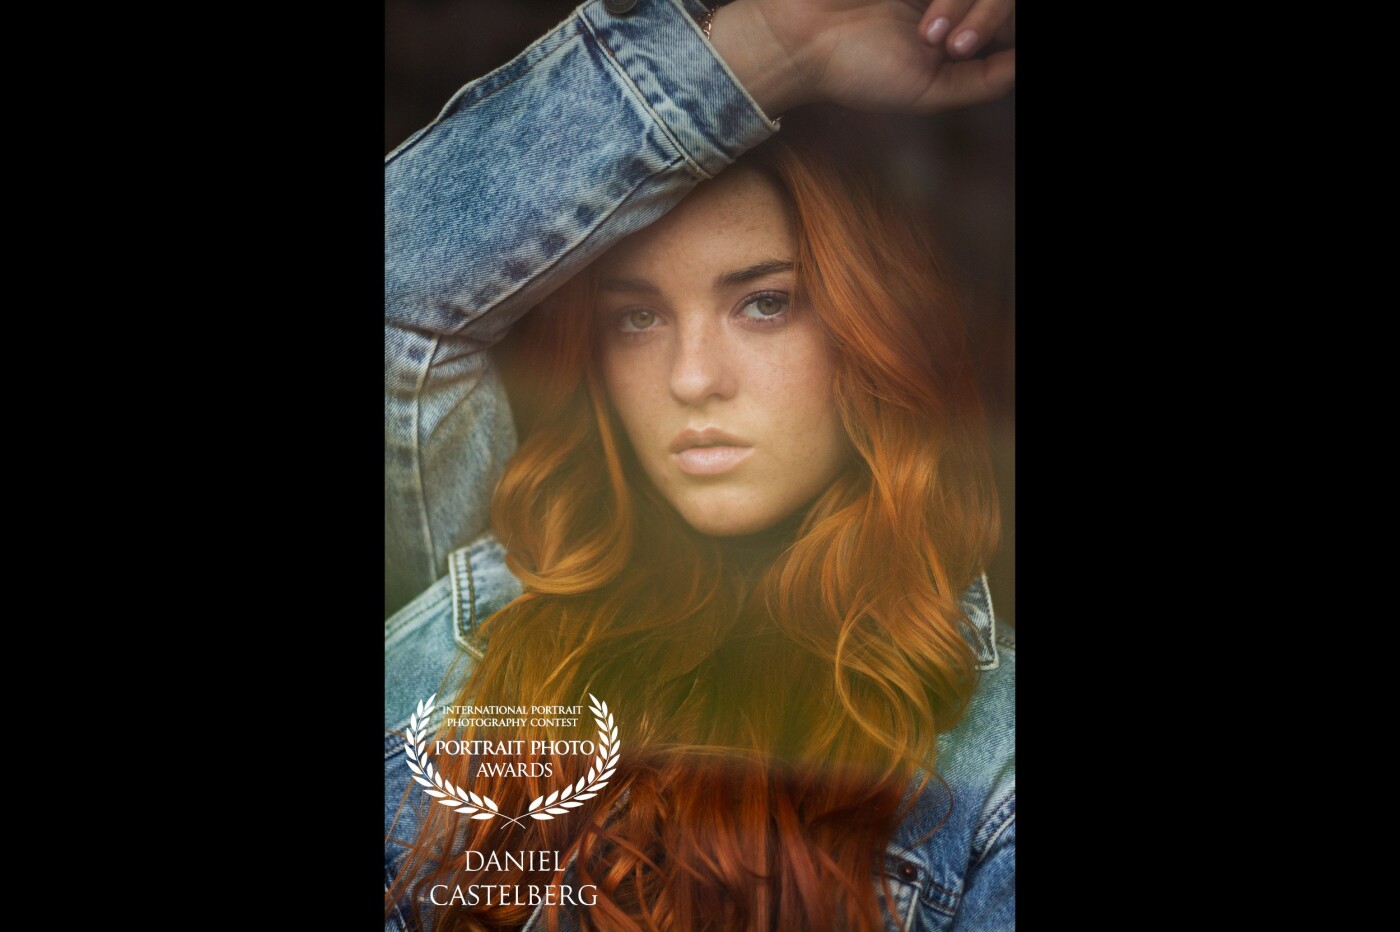 It was one of my first photography workshop with Lara as the model. In front of the window with this beautiful girl, the red hair and the jeans-jacket, absolutely amazing. Thanks to Lara.